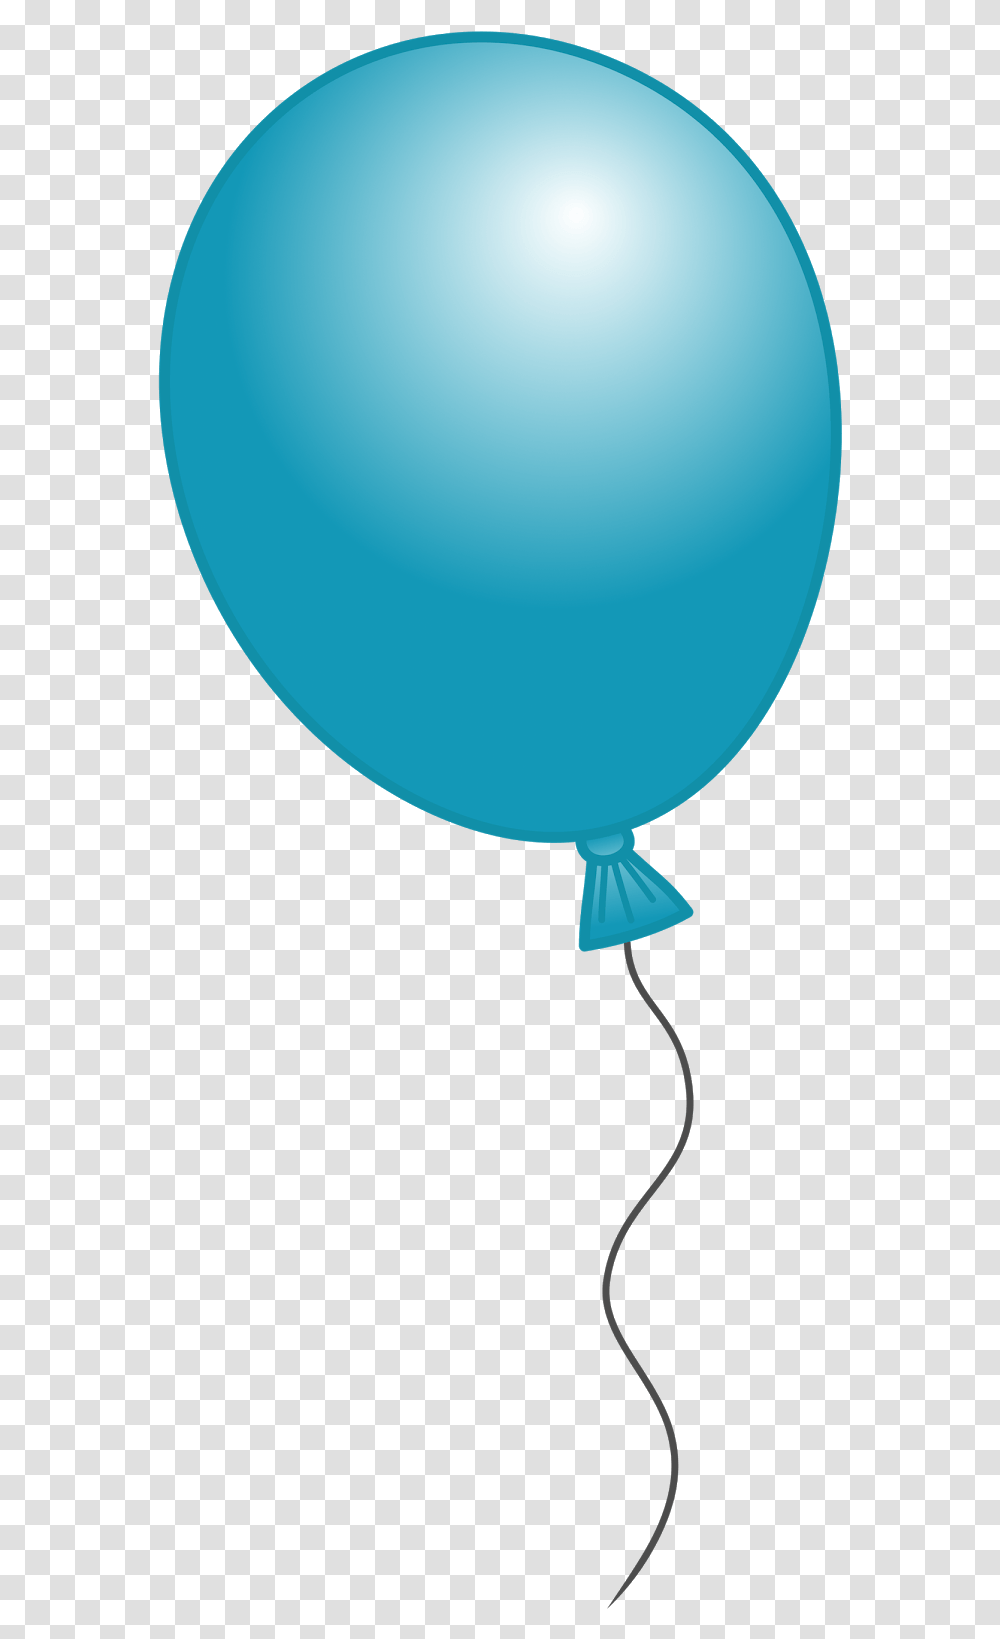 Orange Green Brown Yellow Balloon Group Clipart Balloon Clipart Transparent Png